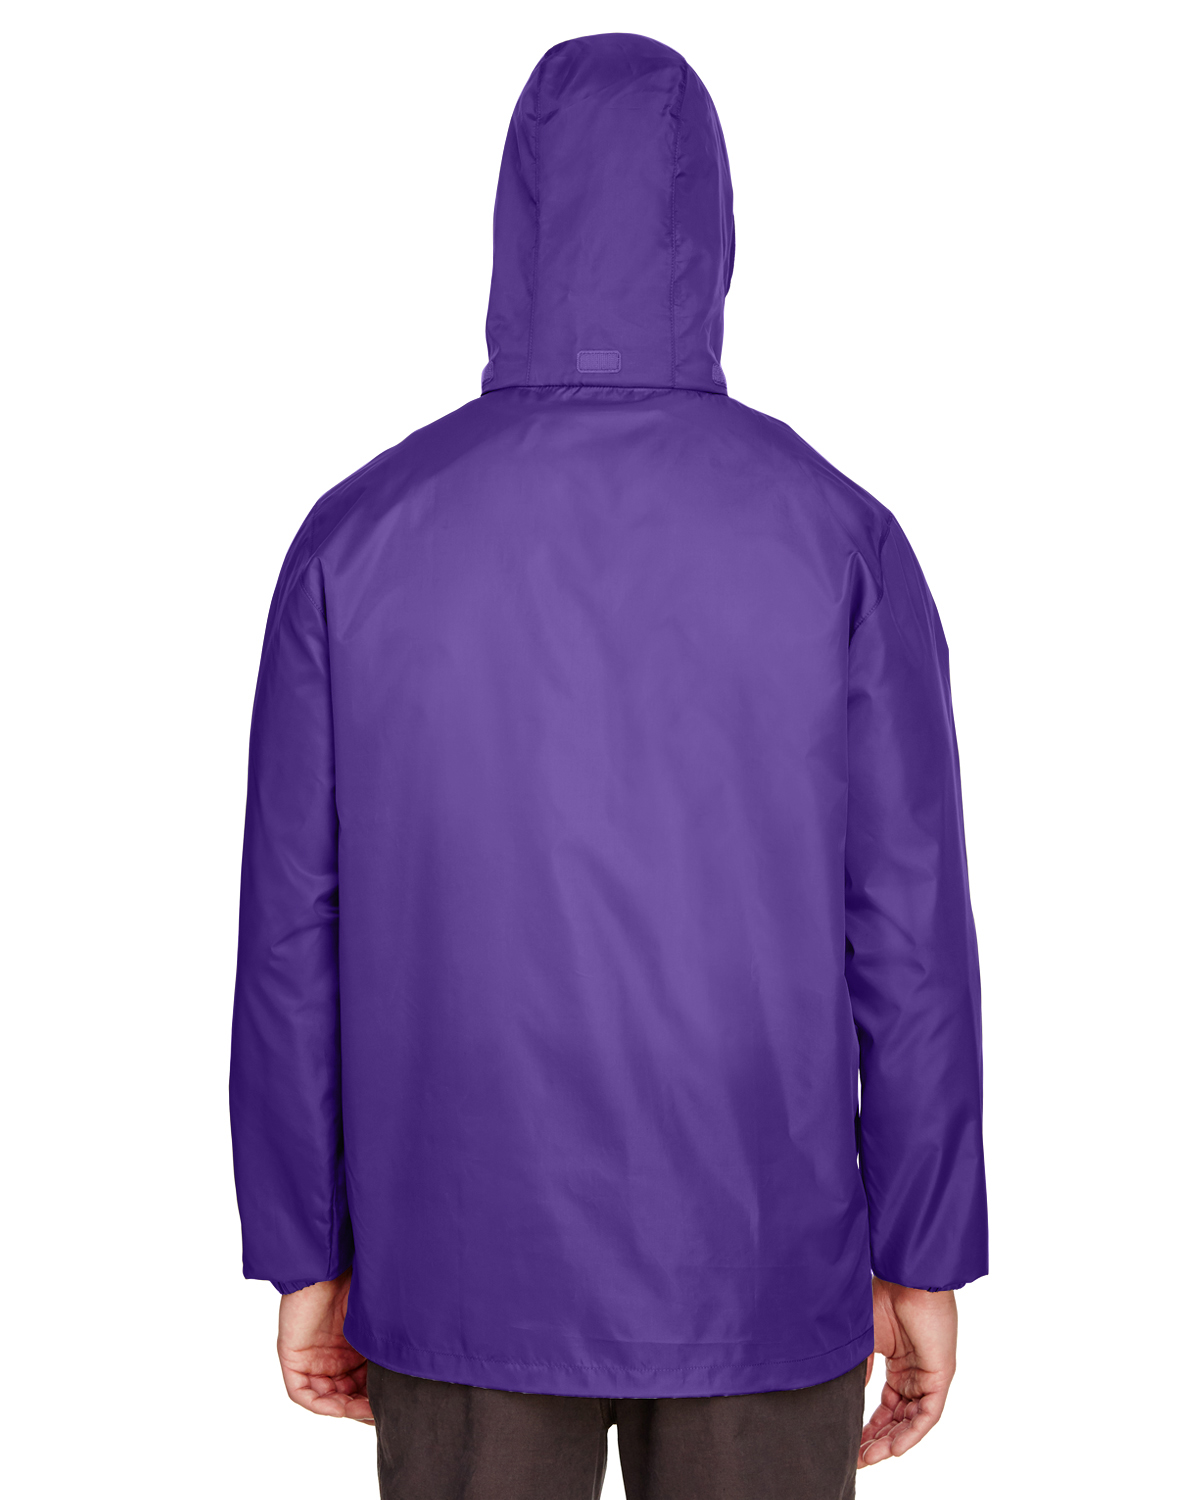 Team 365, The Adult Zone Protect Lightweight Jacket - SPORT PURPLE - XL - image 2 of 2